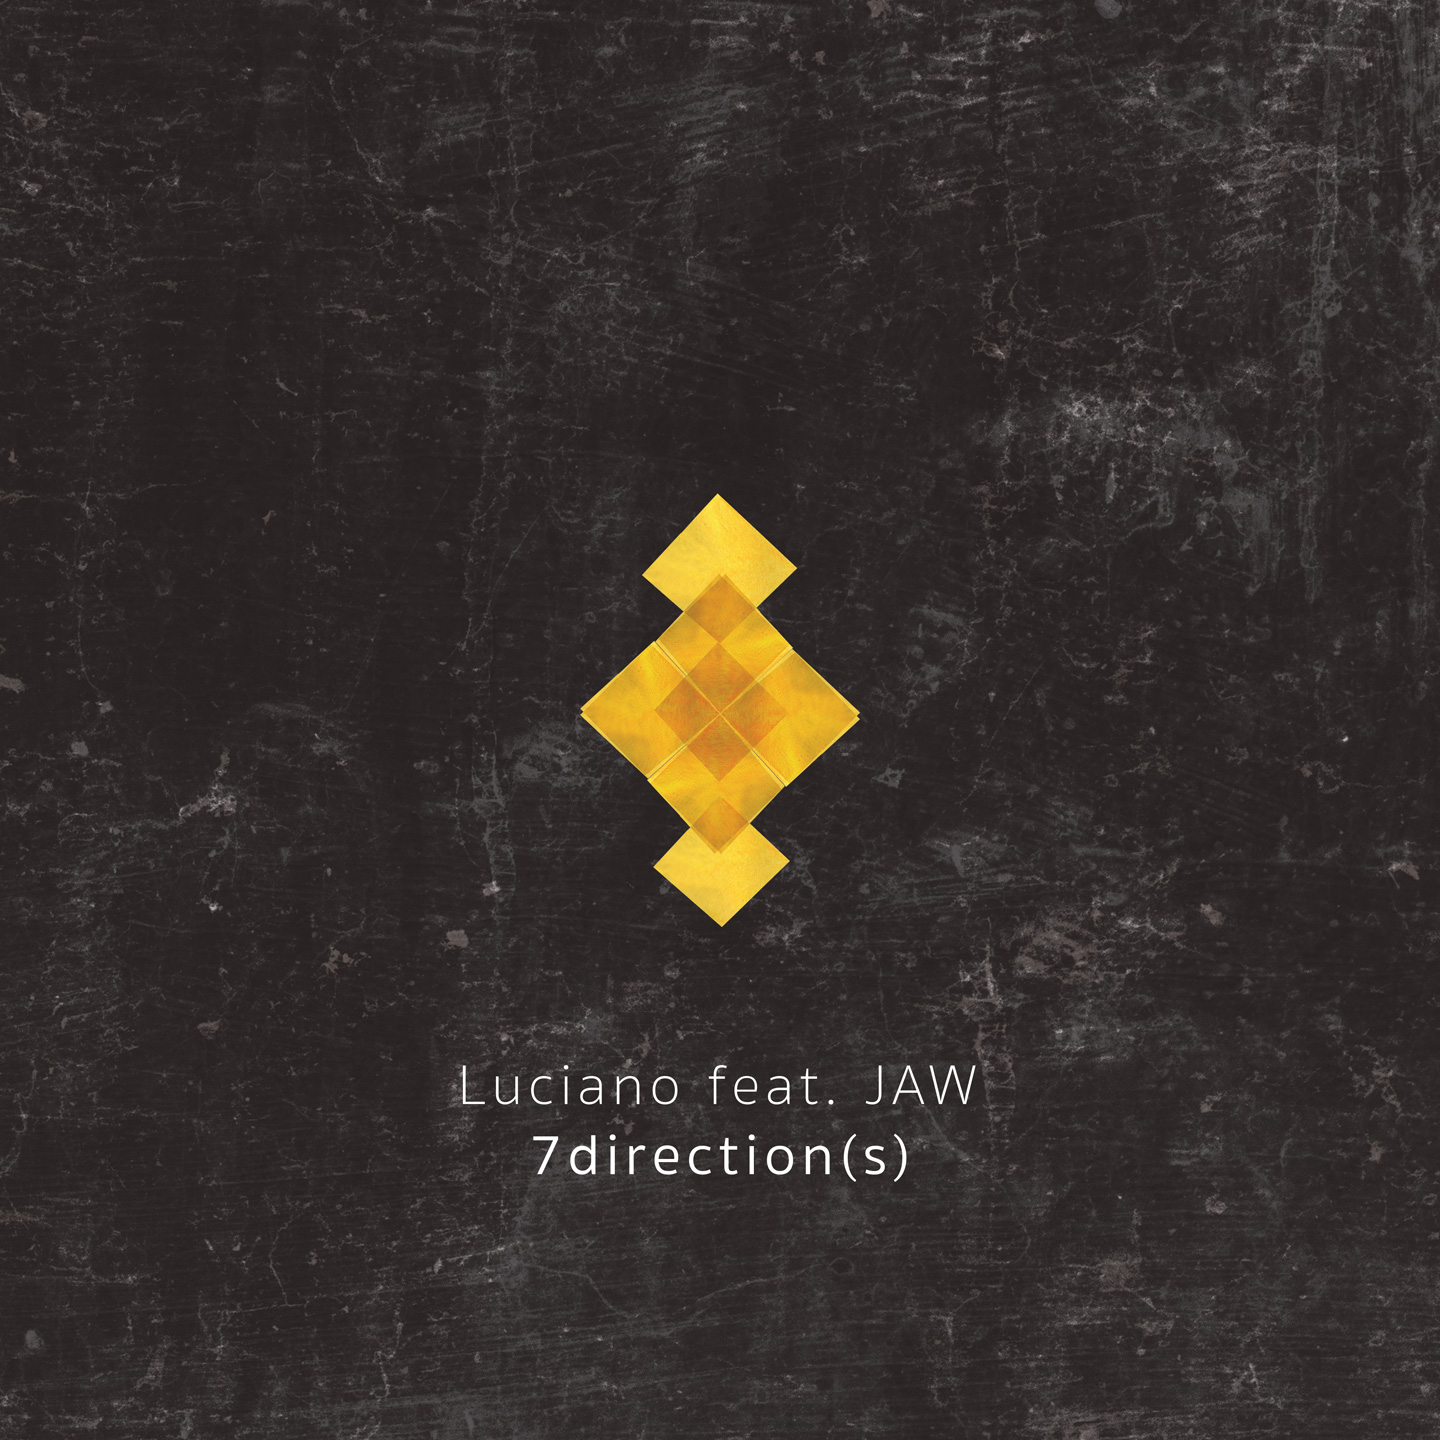 00 Luciano feat. JAW - 7direction(s) Cover